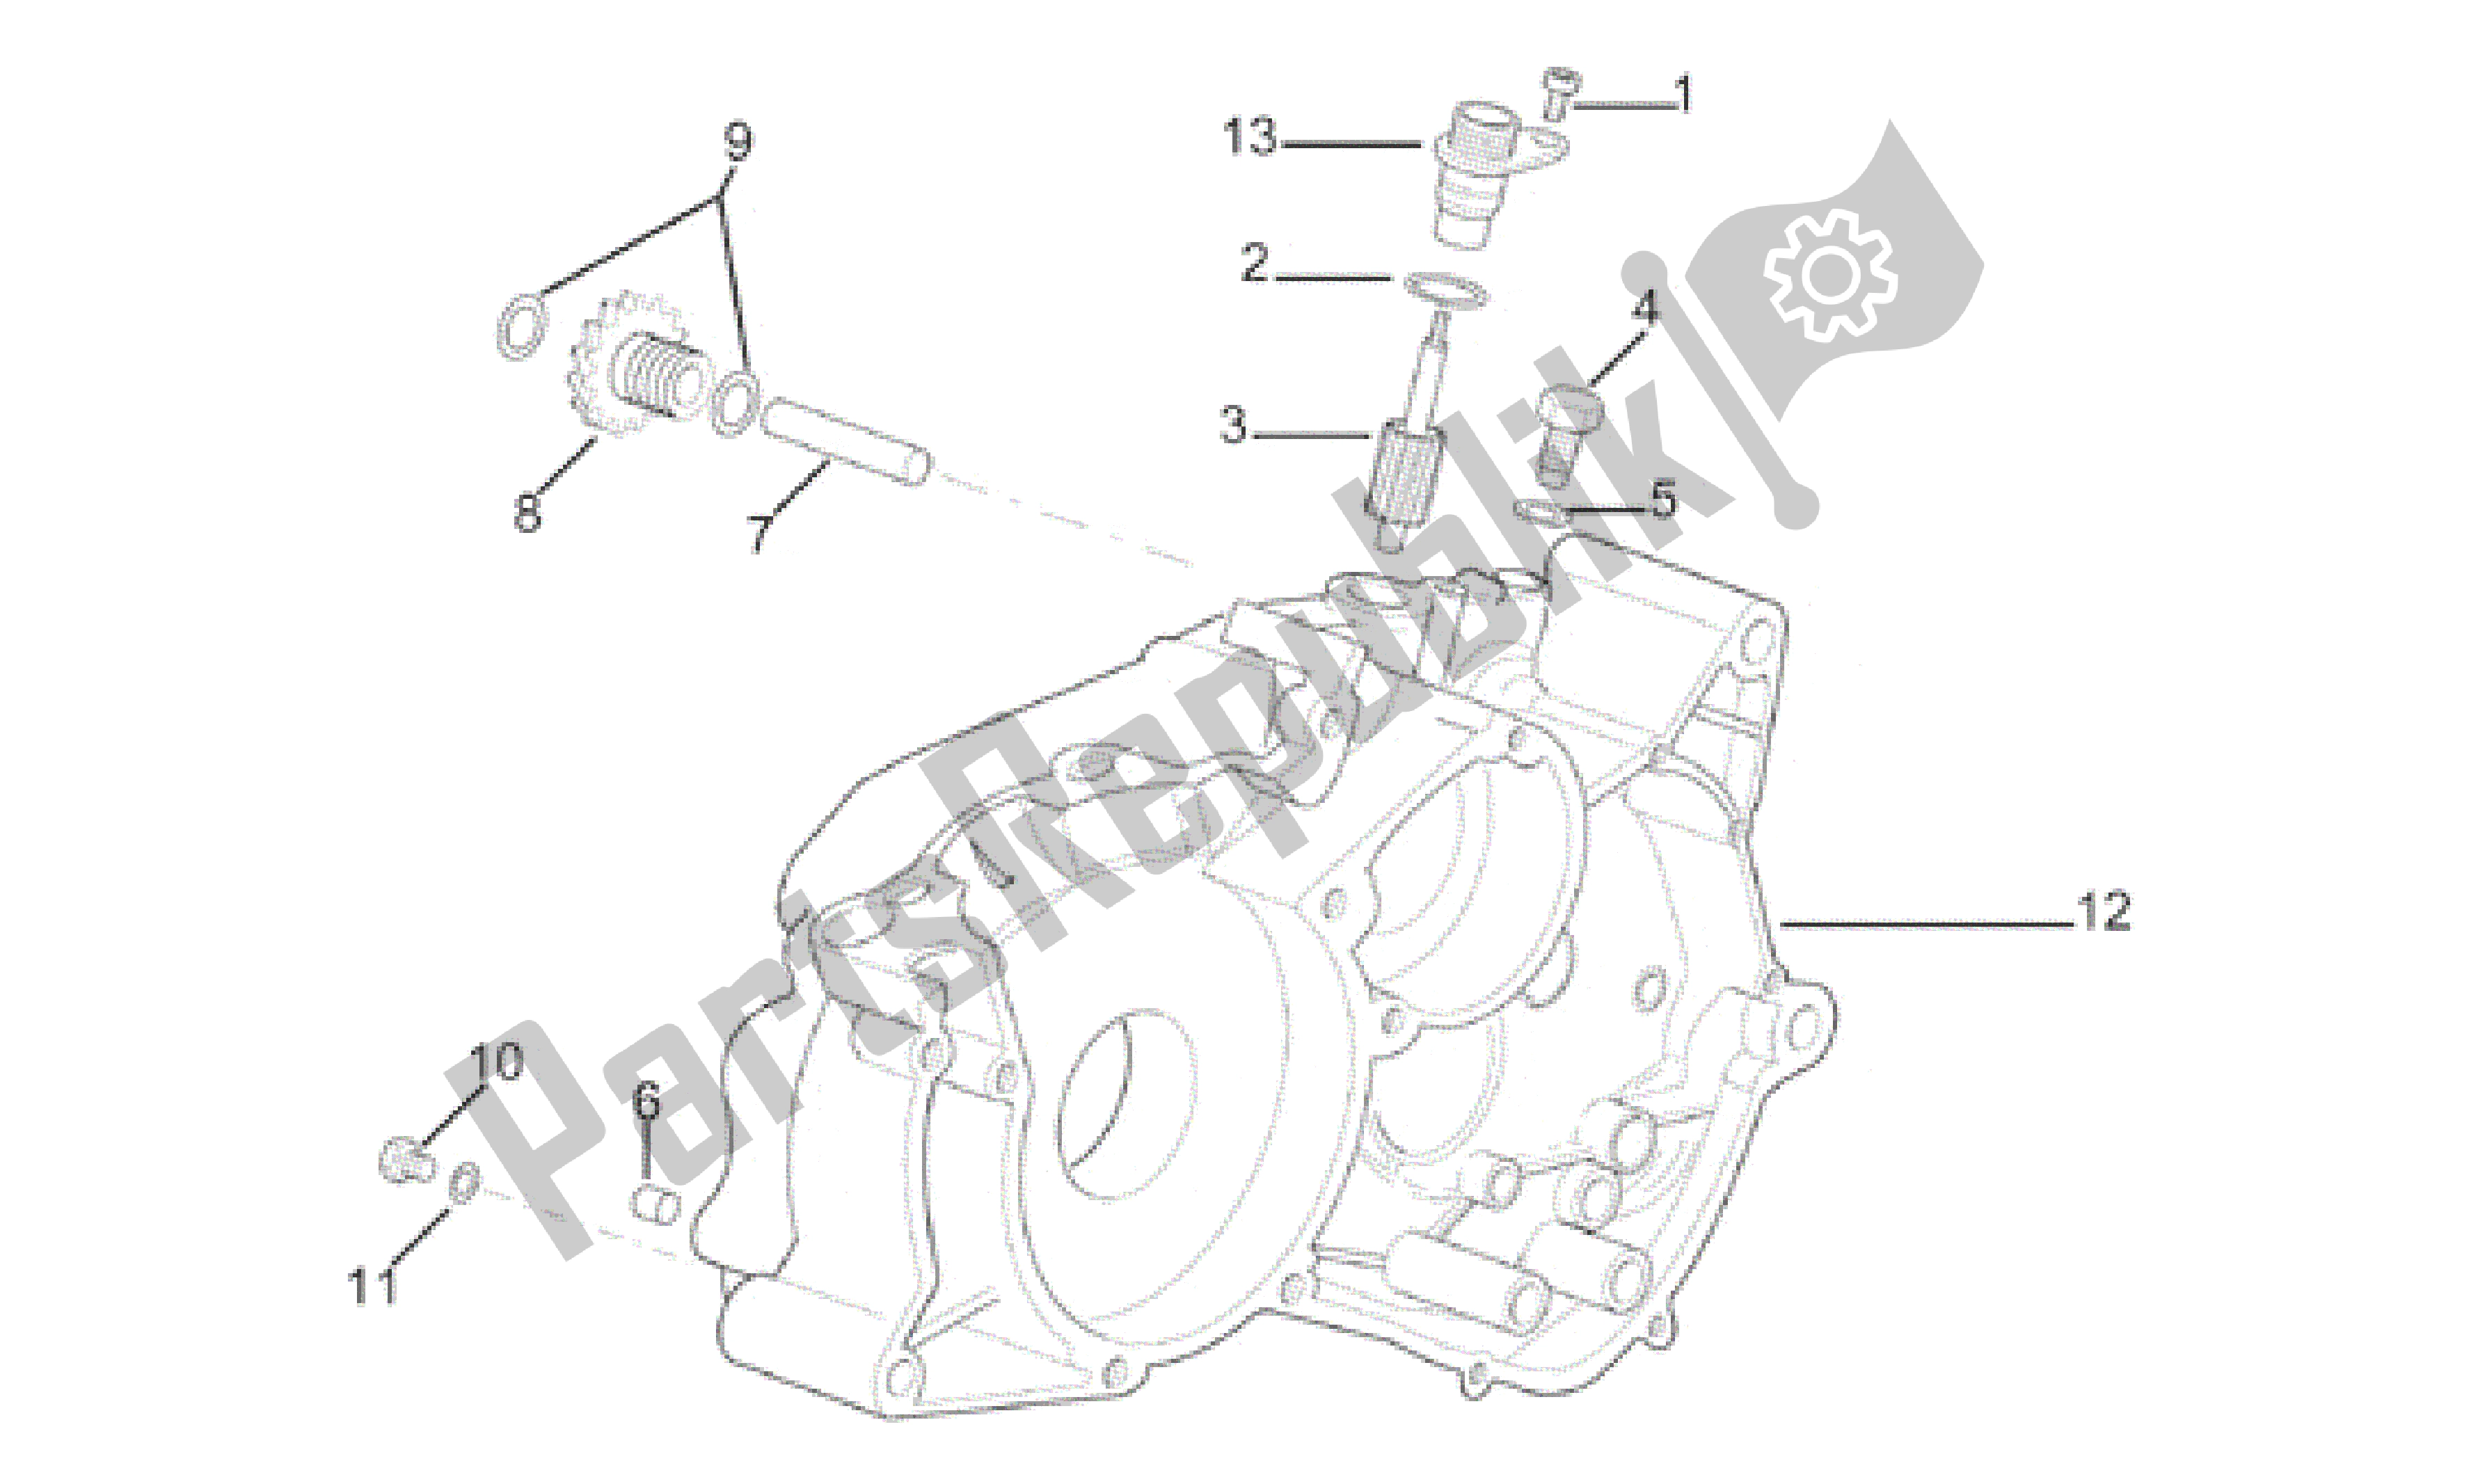 All parts for the Left Crankcase of the Aprilia RS 50 1996 - 1998